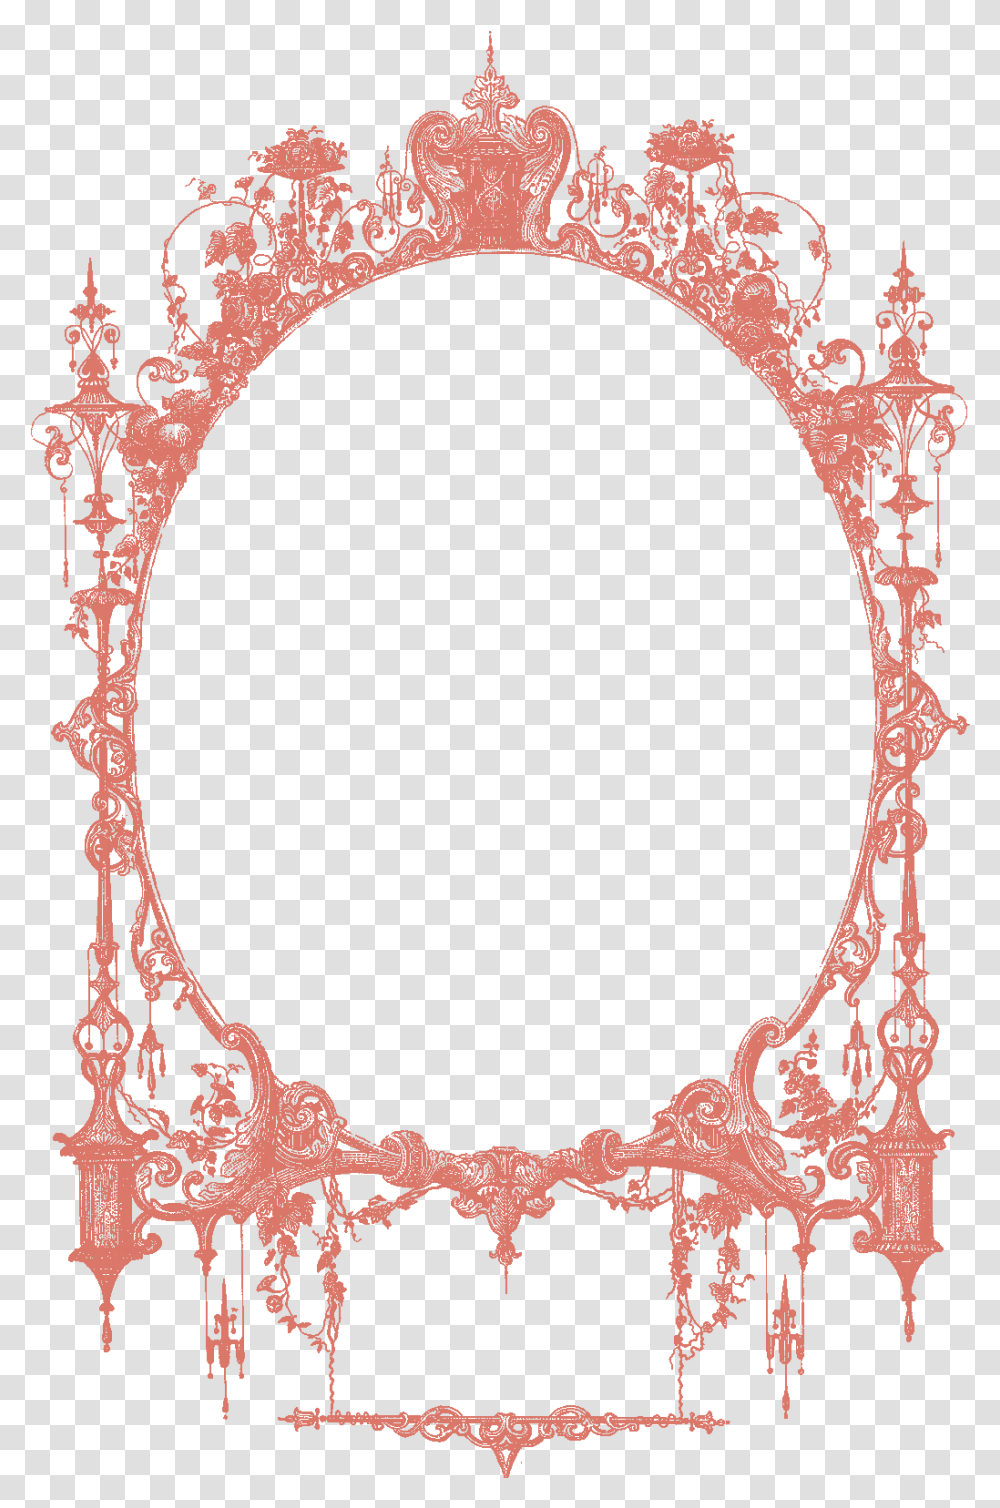 Download Free Halloween Frame Invitation Clipart Gothic Frame Halloween Invite, Rug, Oval, Lace Transparent Png